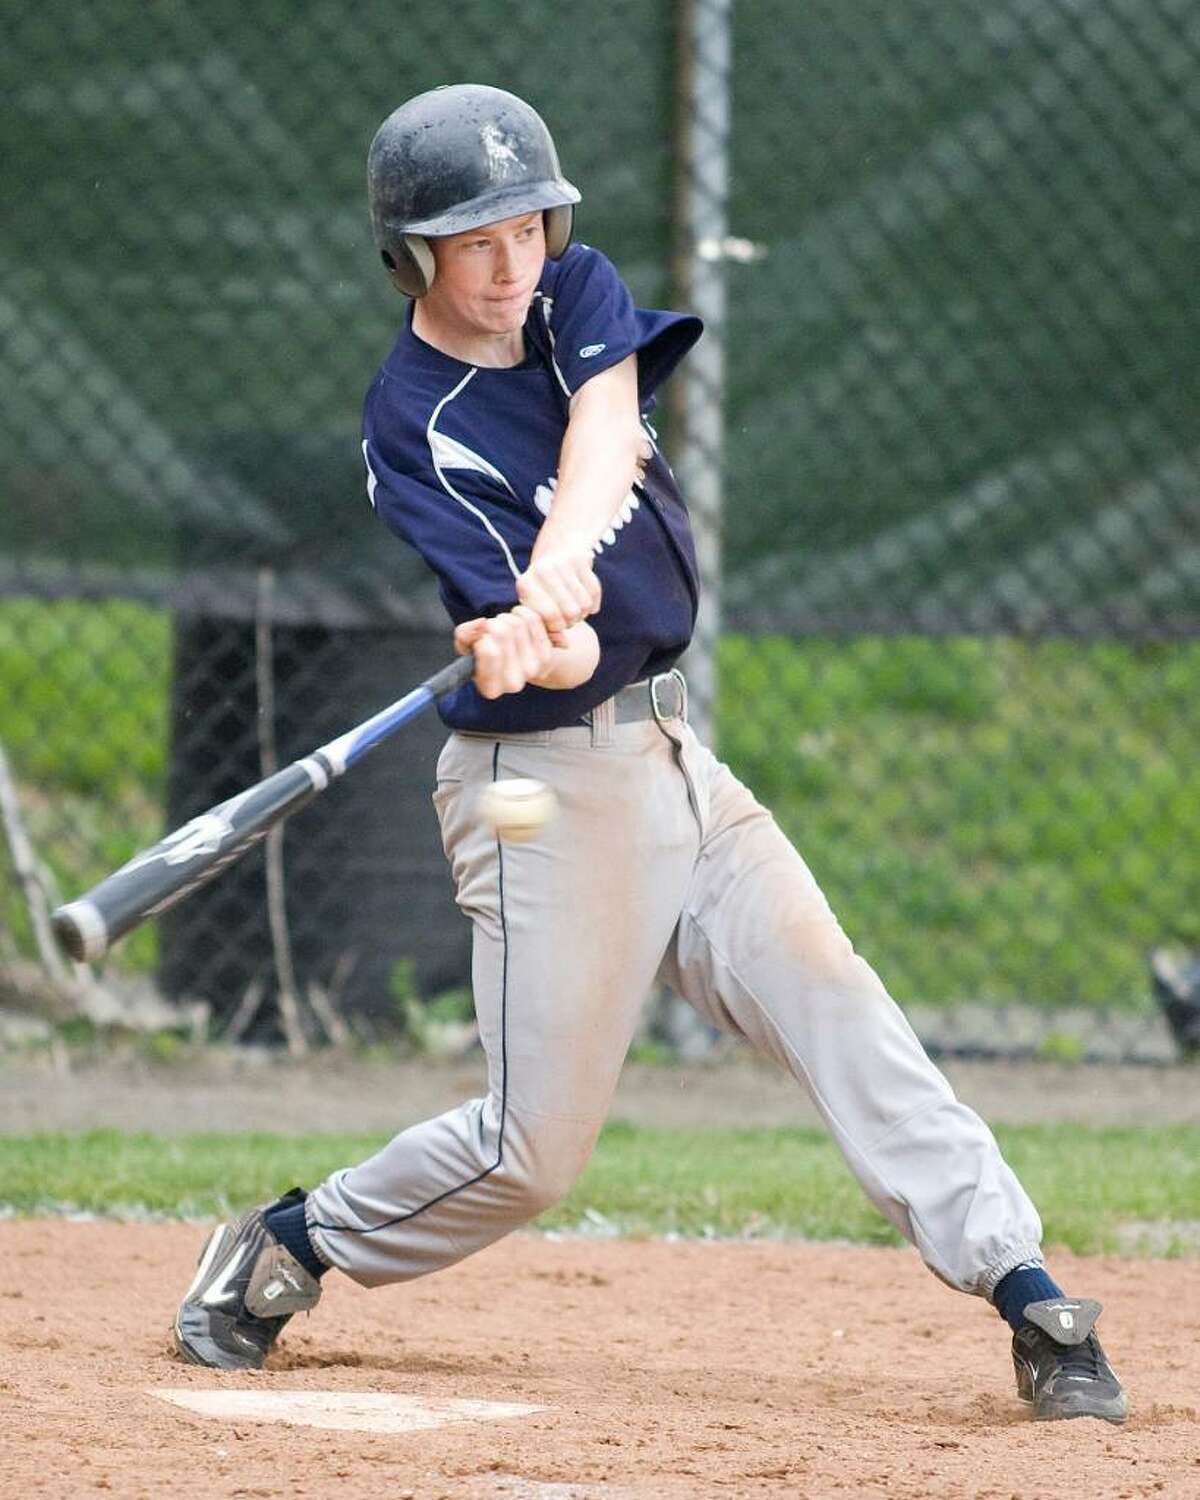 Immaculate's Joey Hannigan belts a bases loaded triple against Abbott Tech Thursday at Immaculate High.